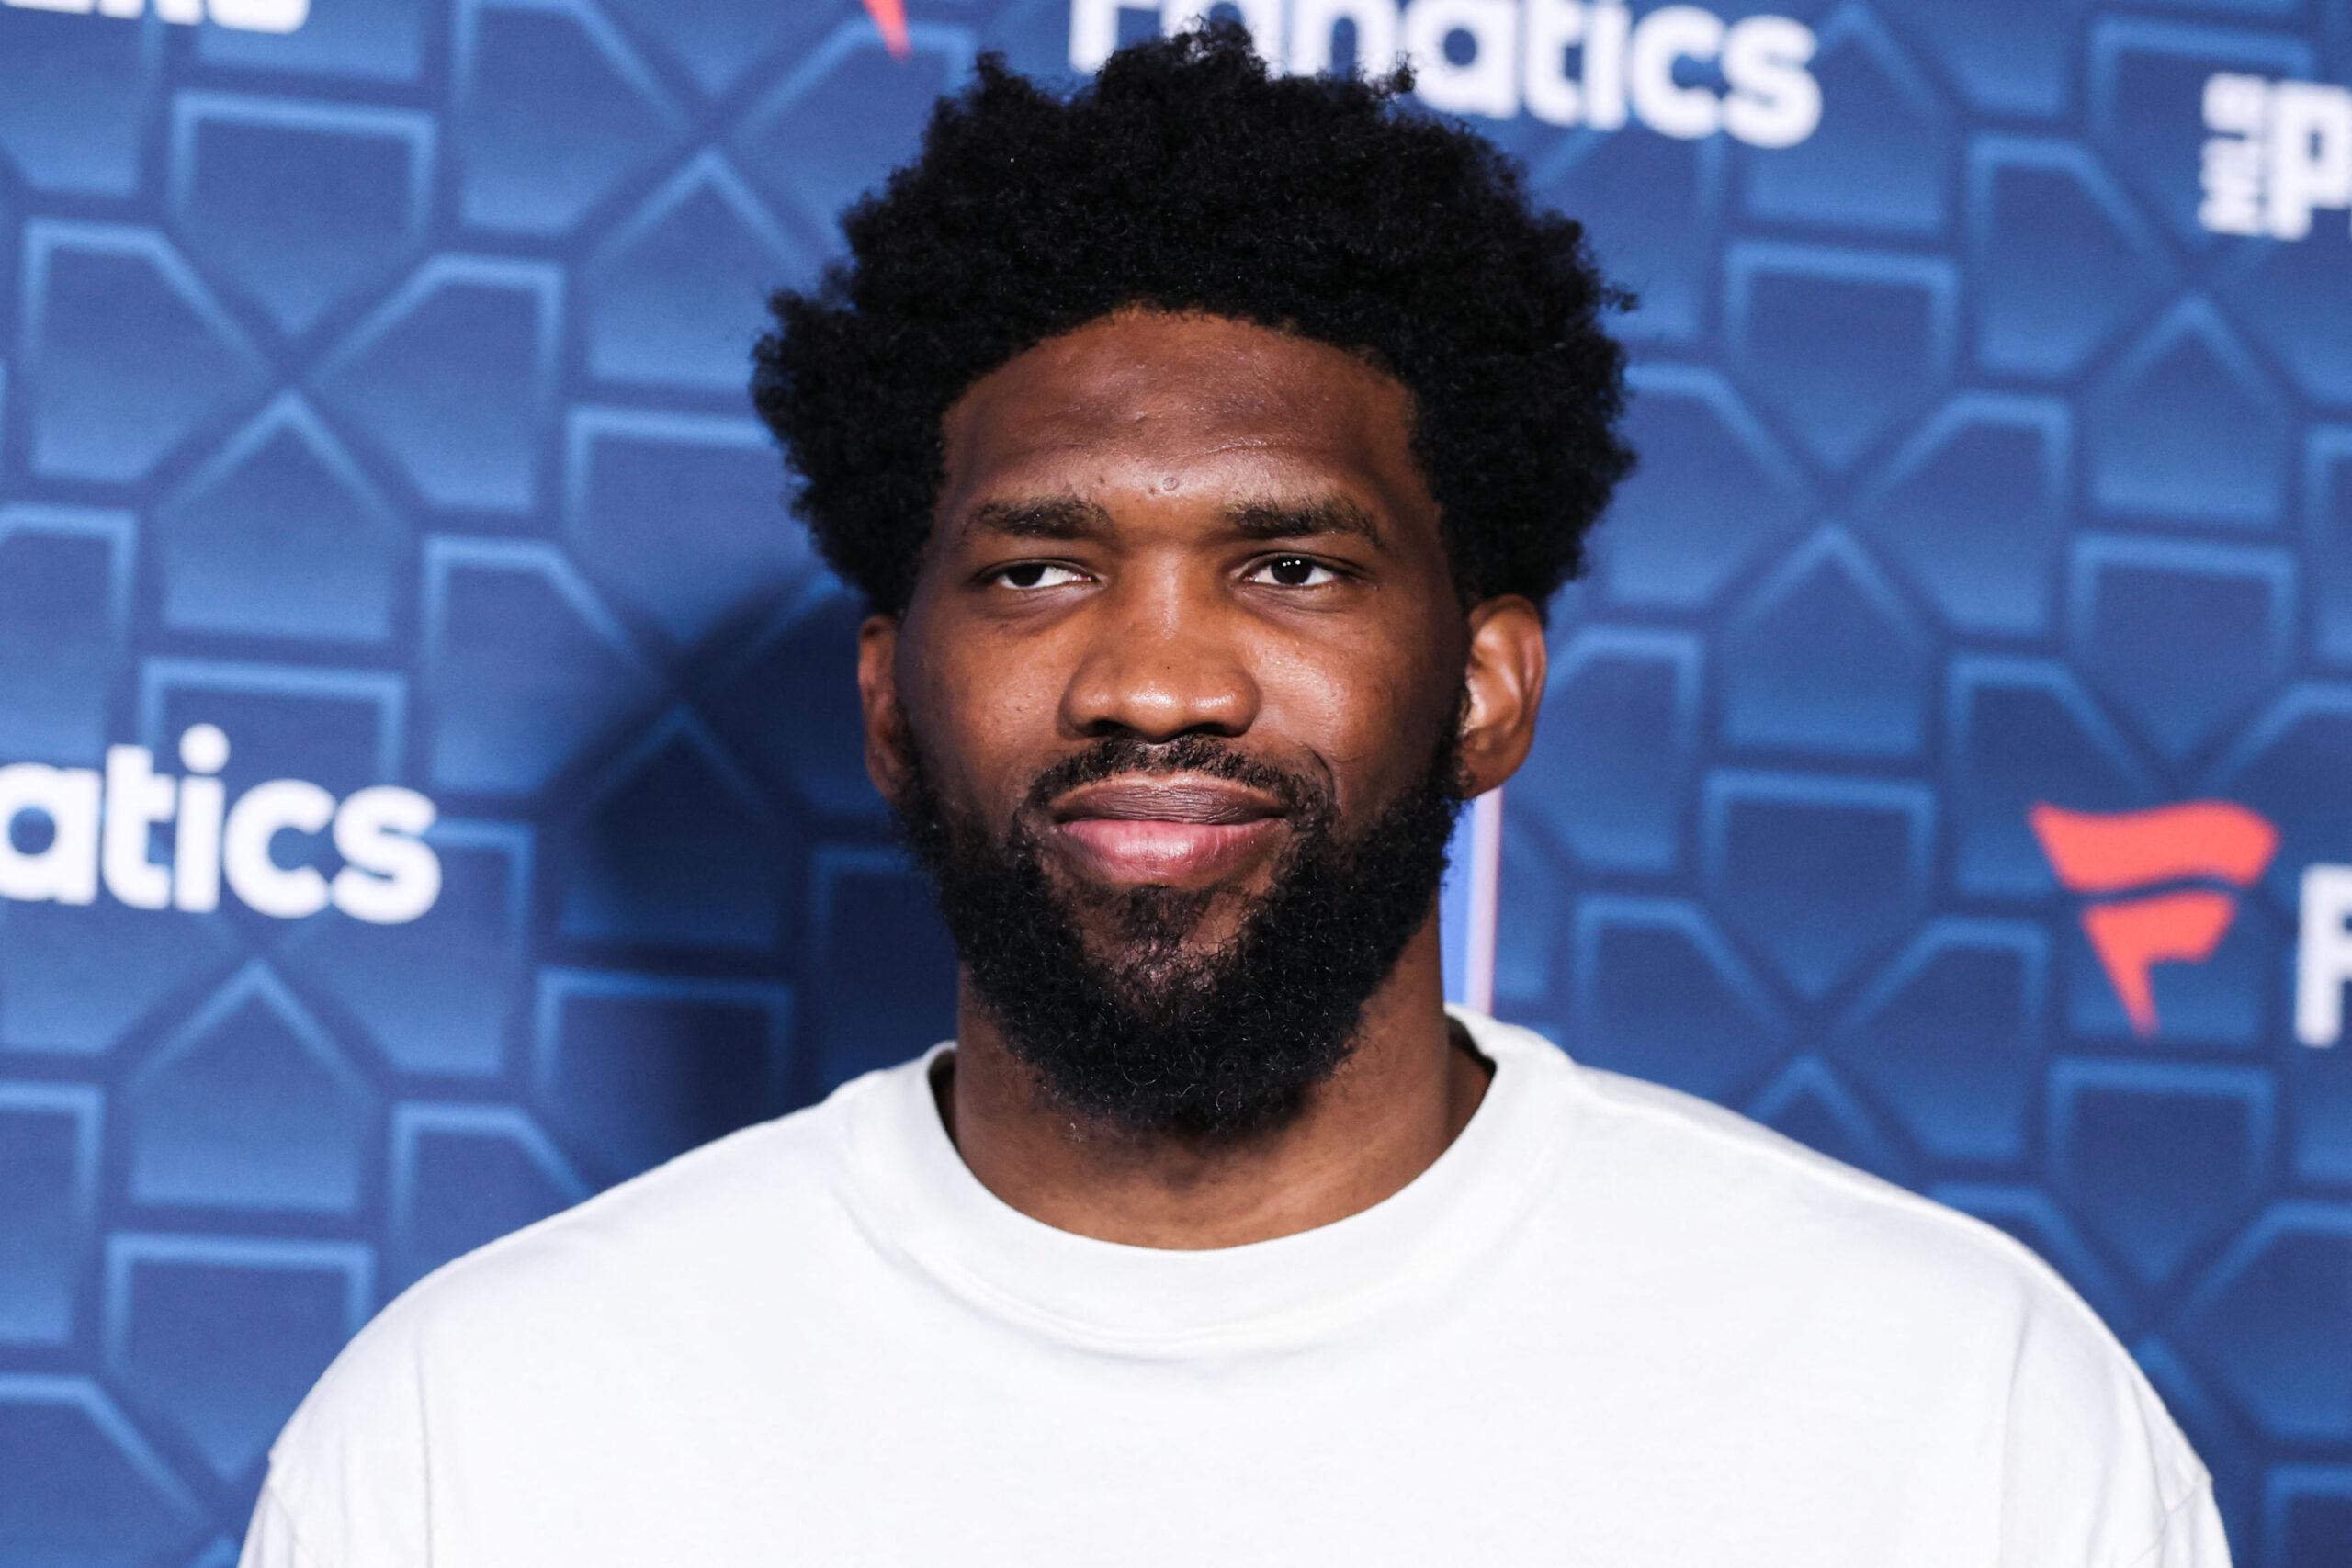 NBA Star Joel Embiid Gets Emotional Seeing His Son During MVP Ceremony